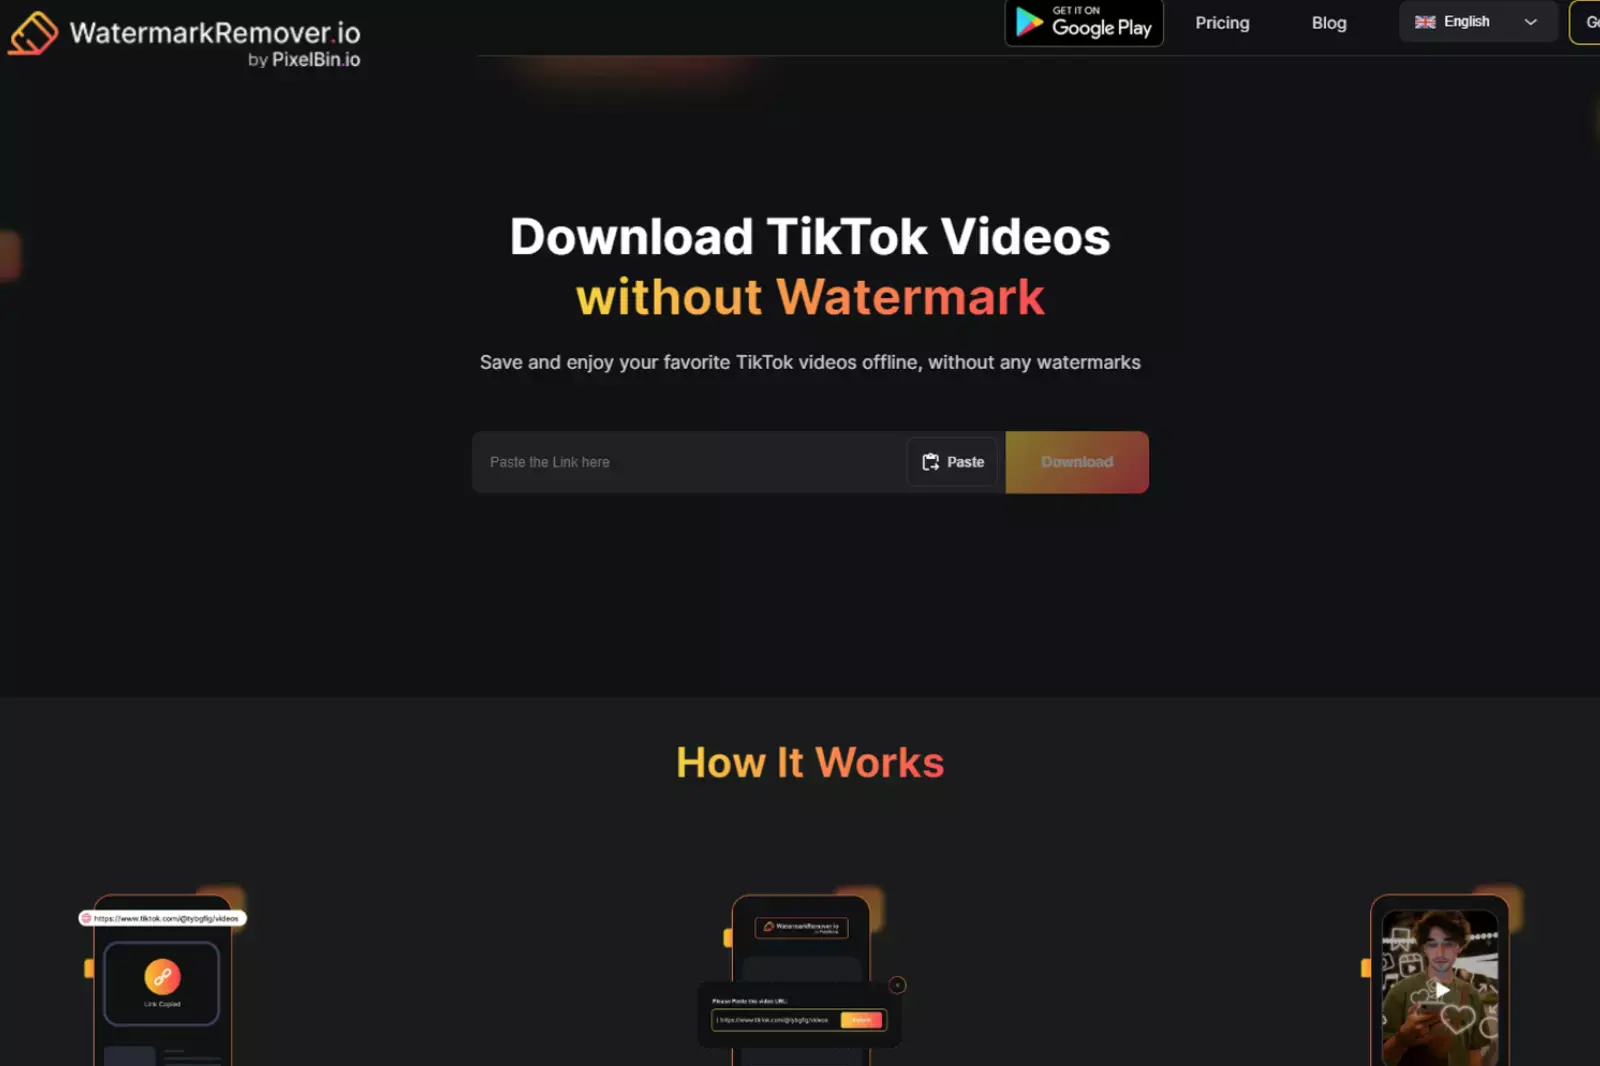 Insert your TikTok video link into the provided search bar